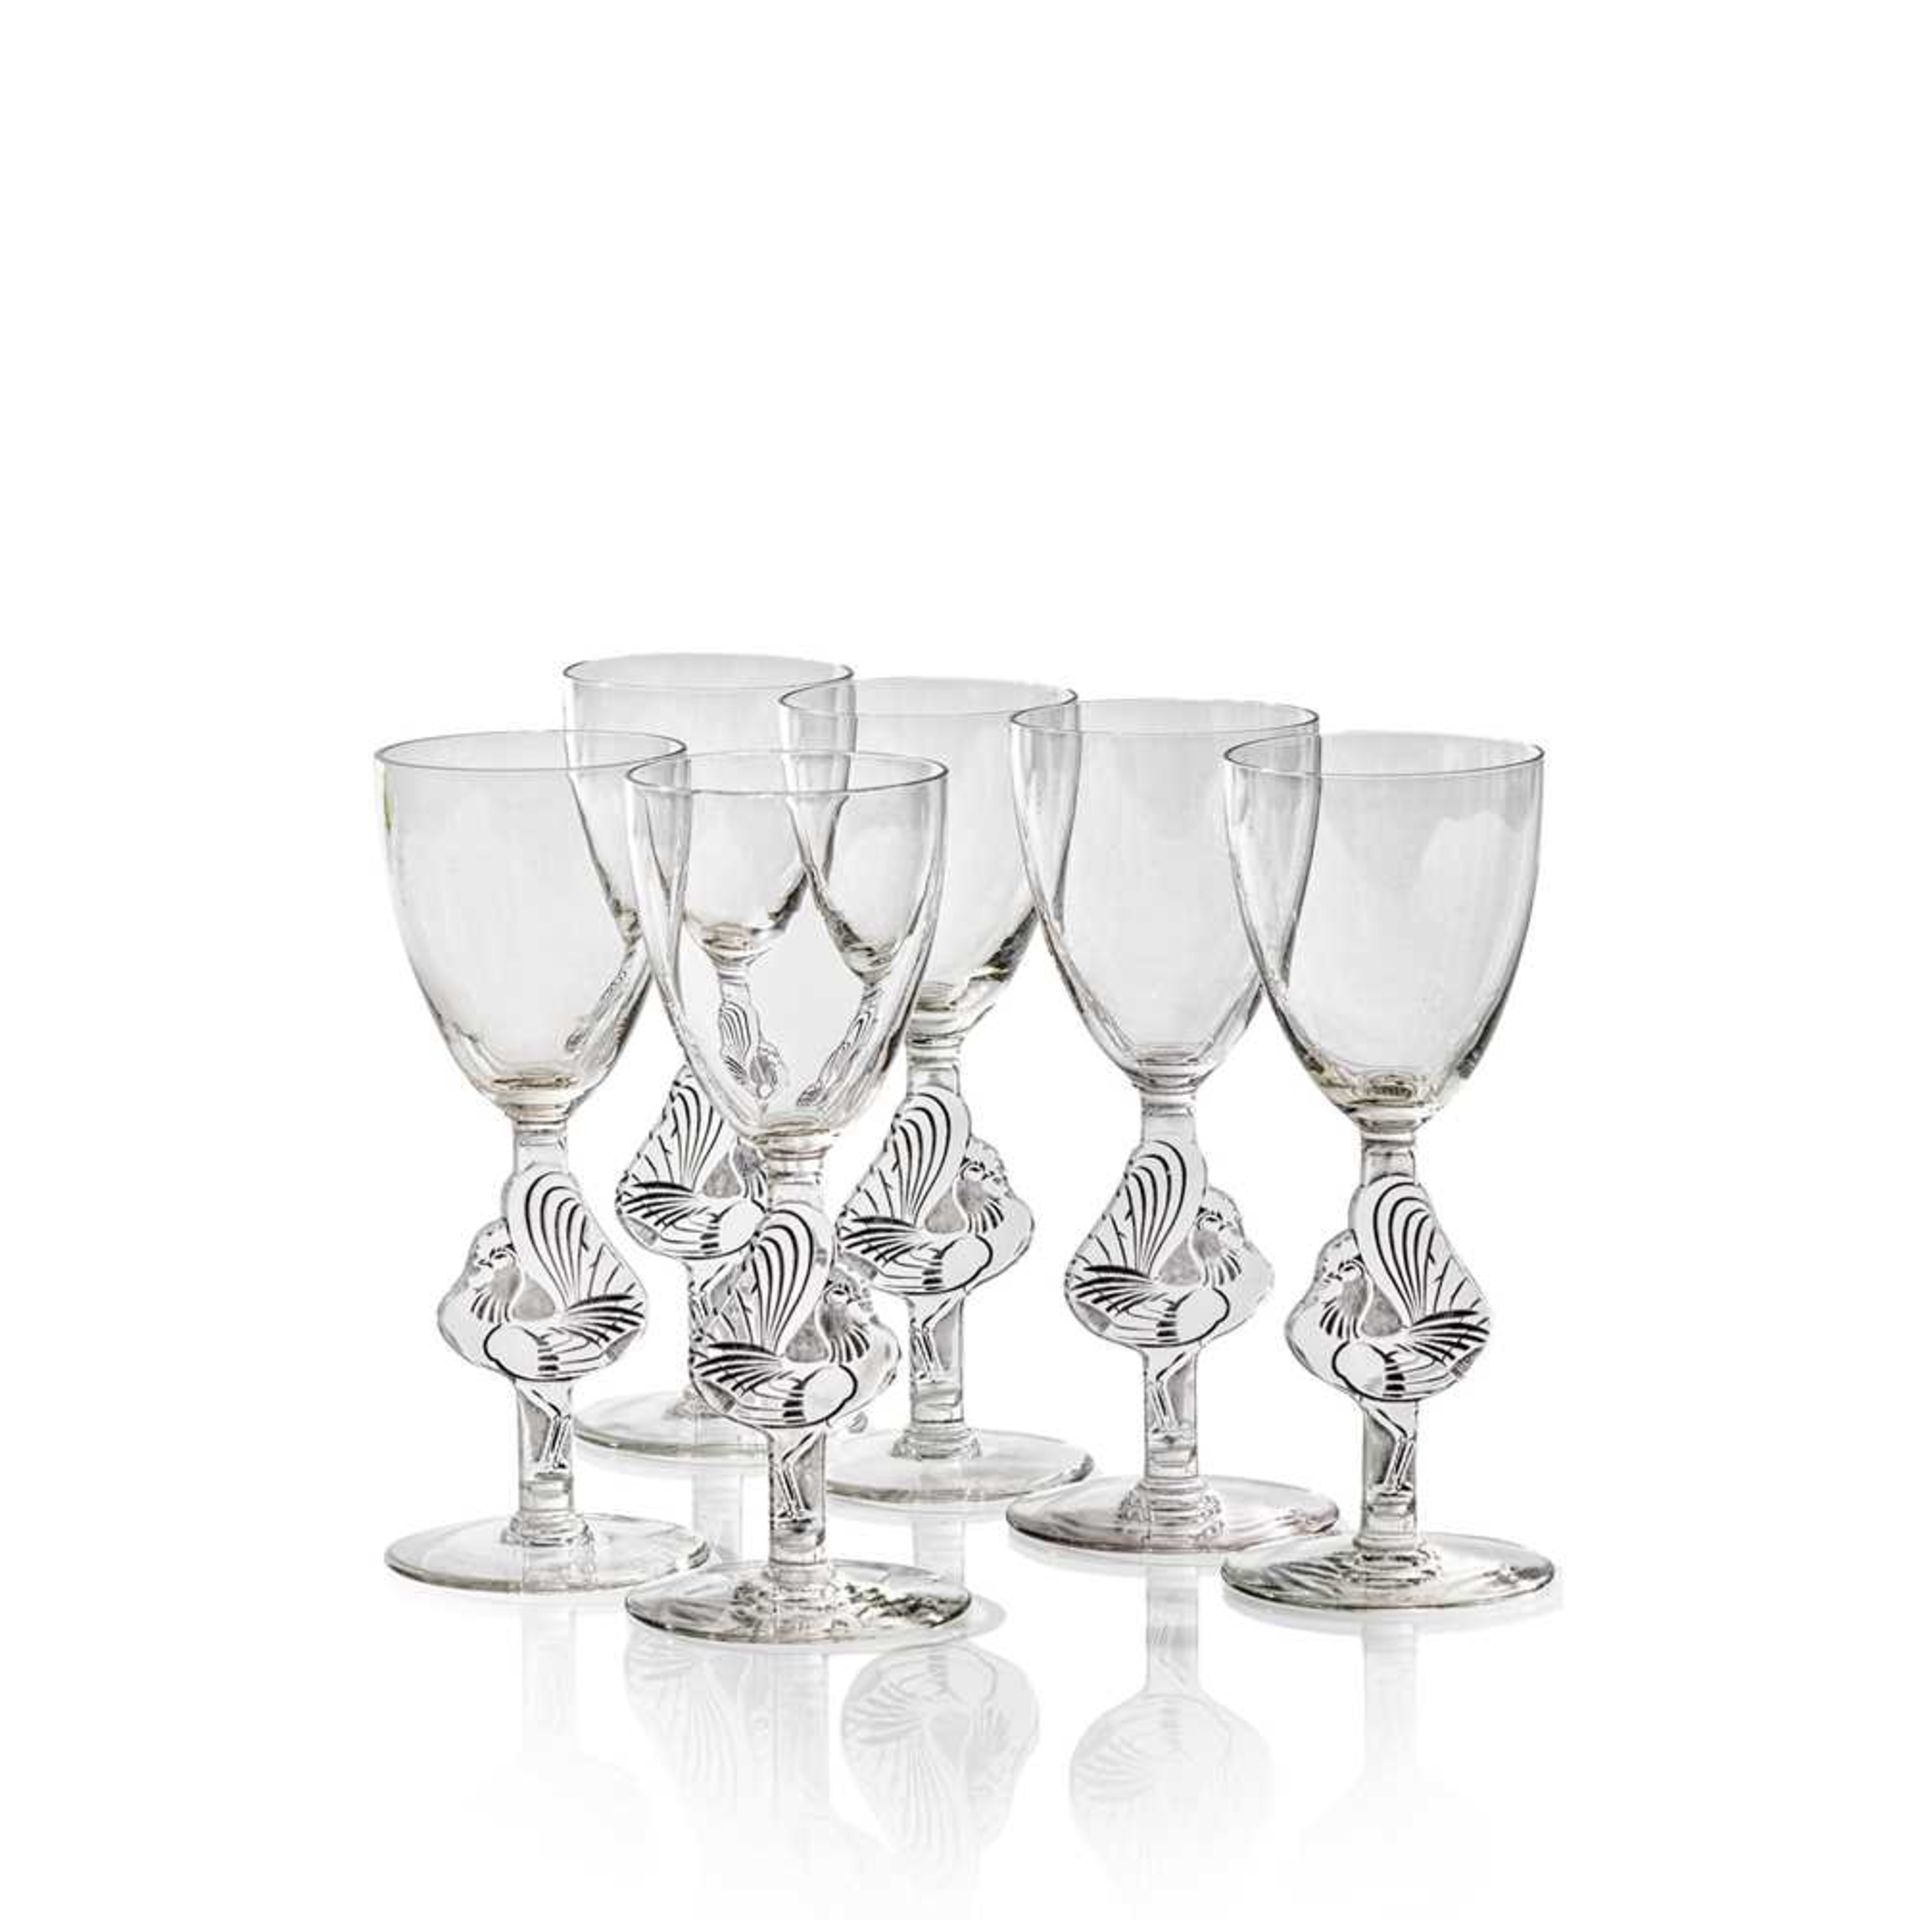 ‡ René Lalique (French 1860-1945) SIX WILLIAM COCKTAIL GLASSES, NO. 3762 - Image 3 of 3